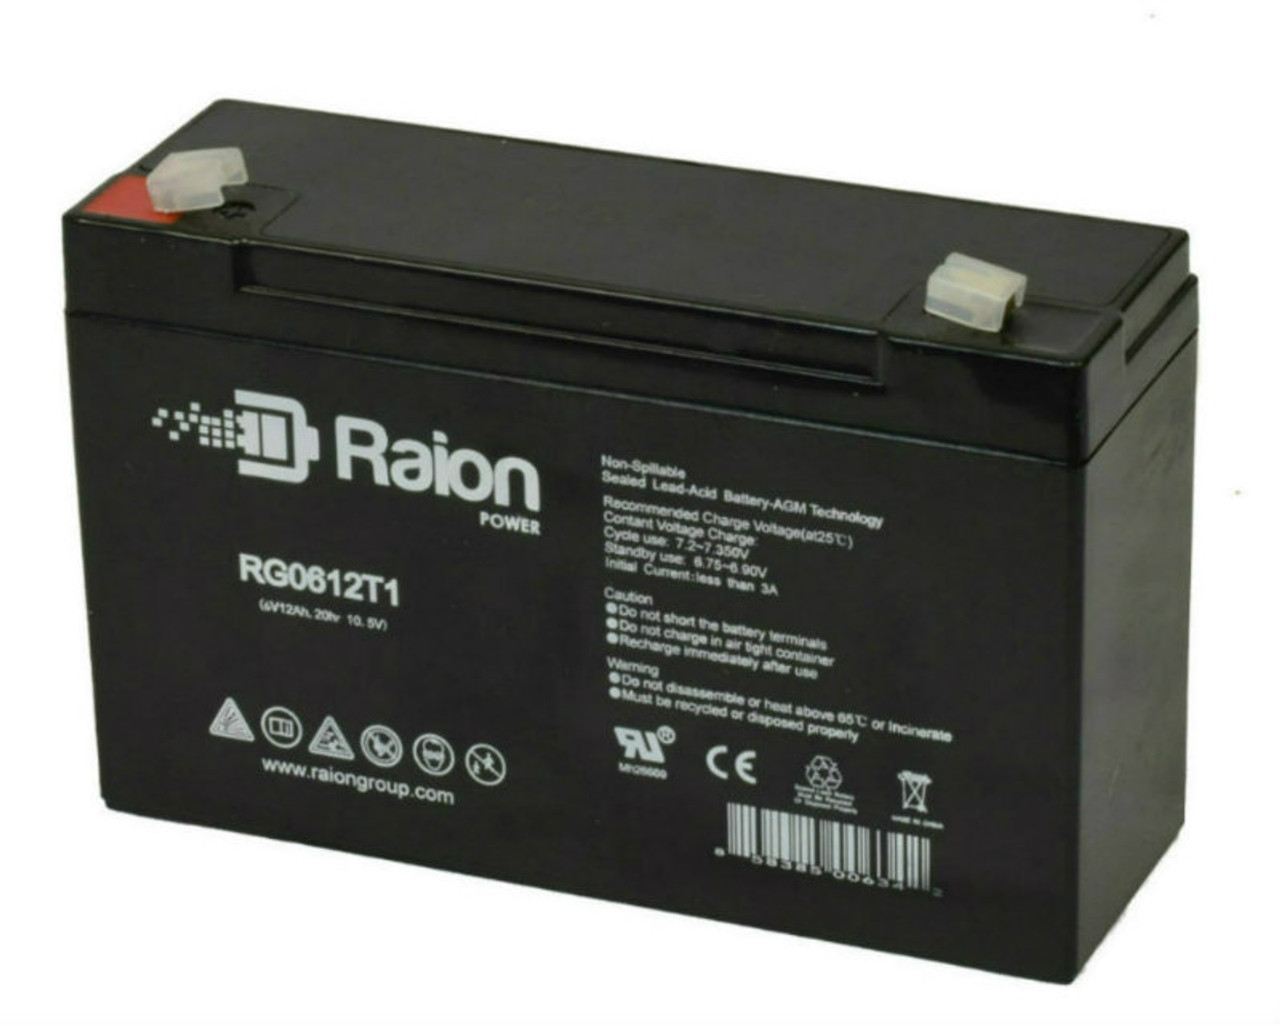 Raion Power RG06120T1 Replacement Battery for Excel XL6100